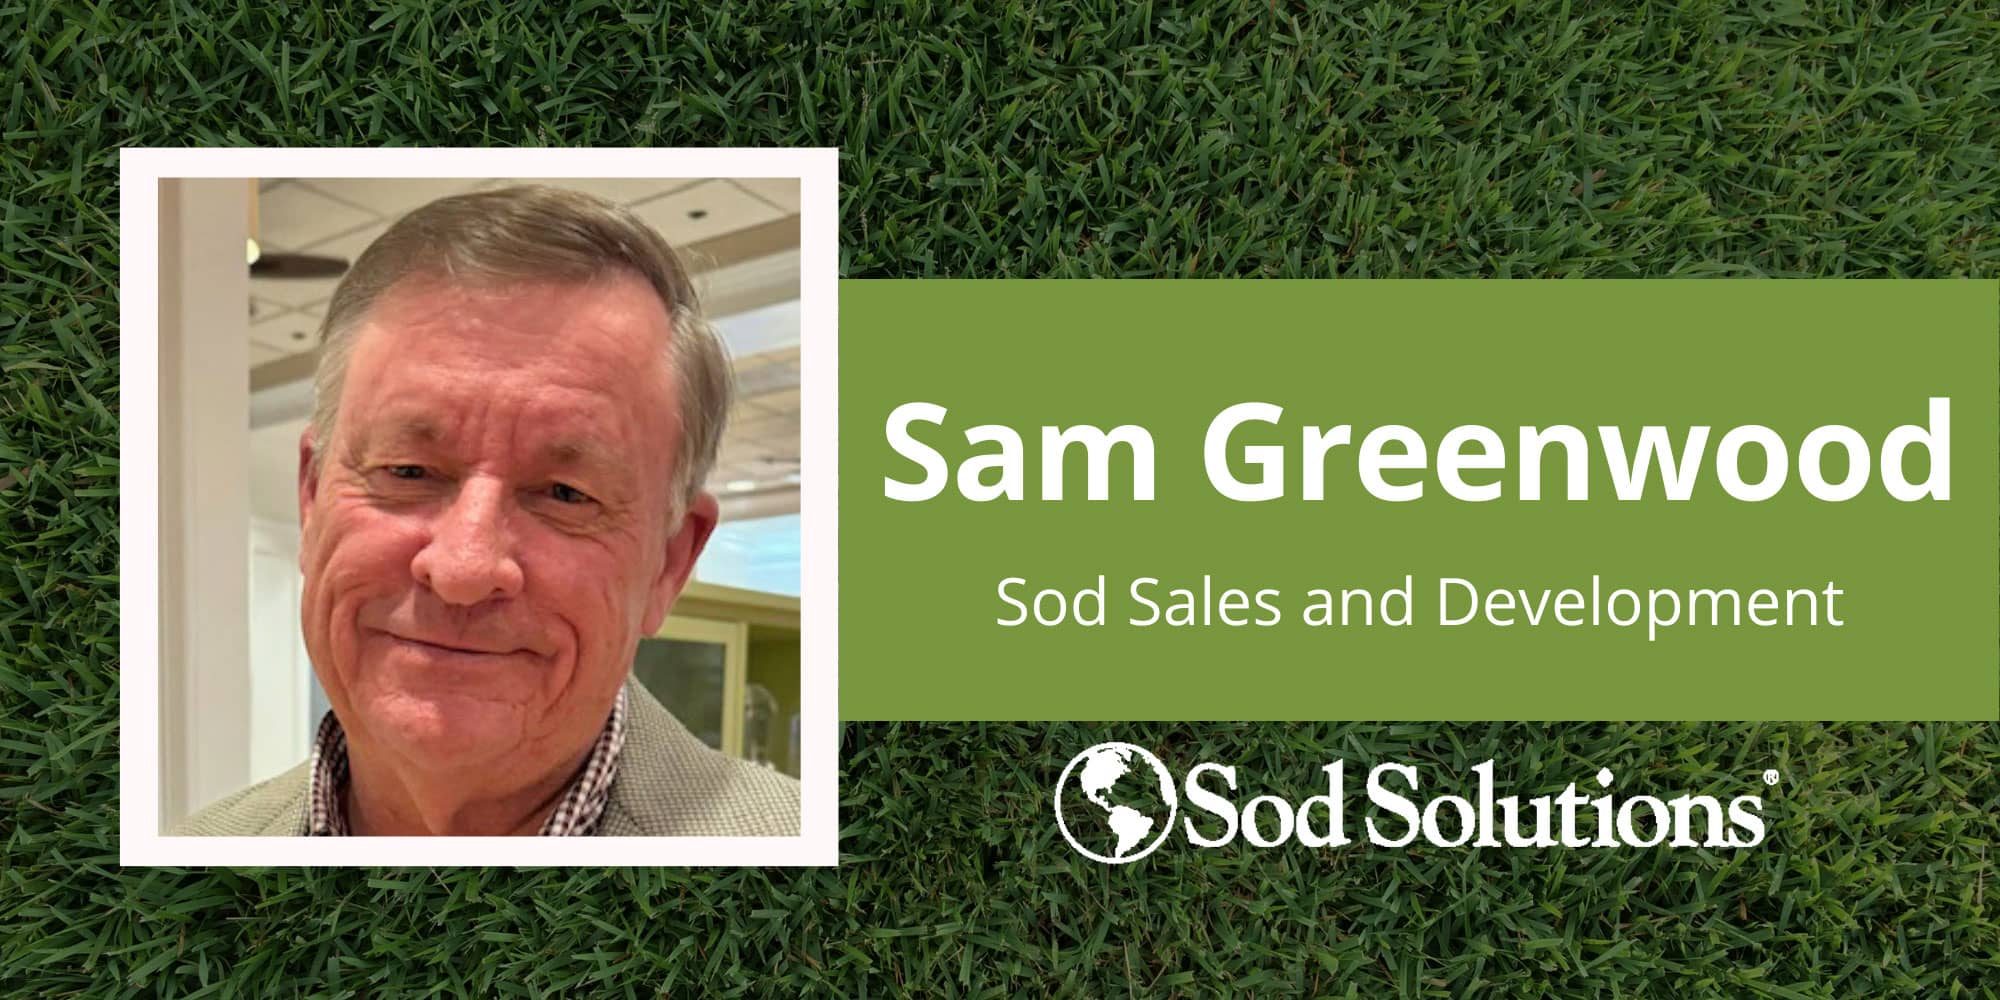 Sod Solutions Hires Sam Greenwood for Sod Sales and Development